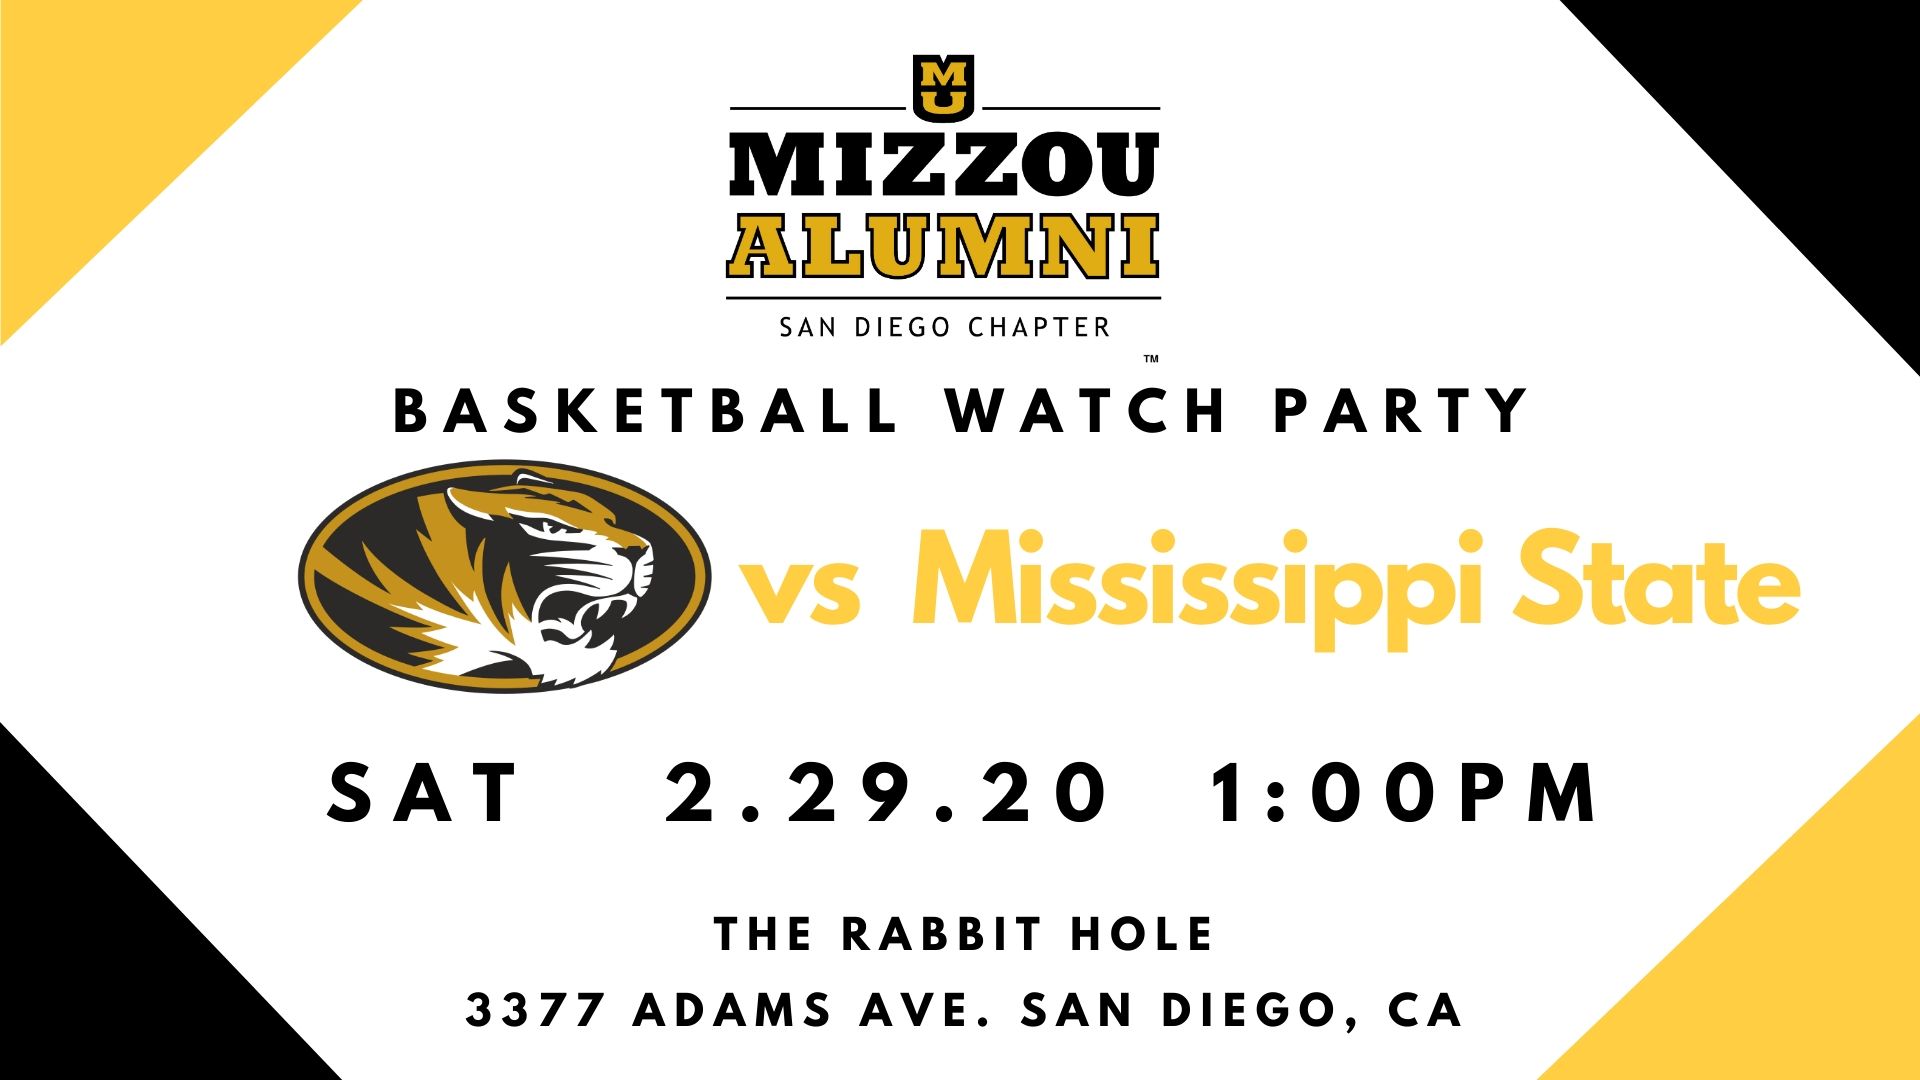 Basketball Watch Party vs Mississippi State